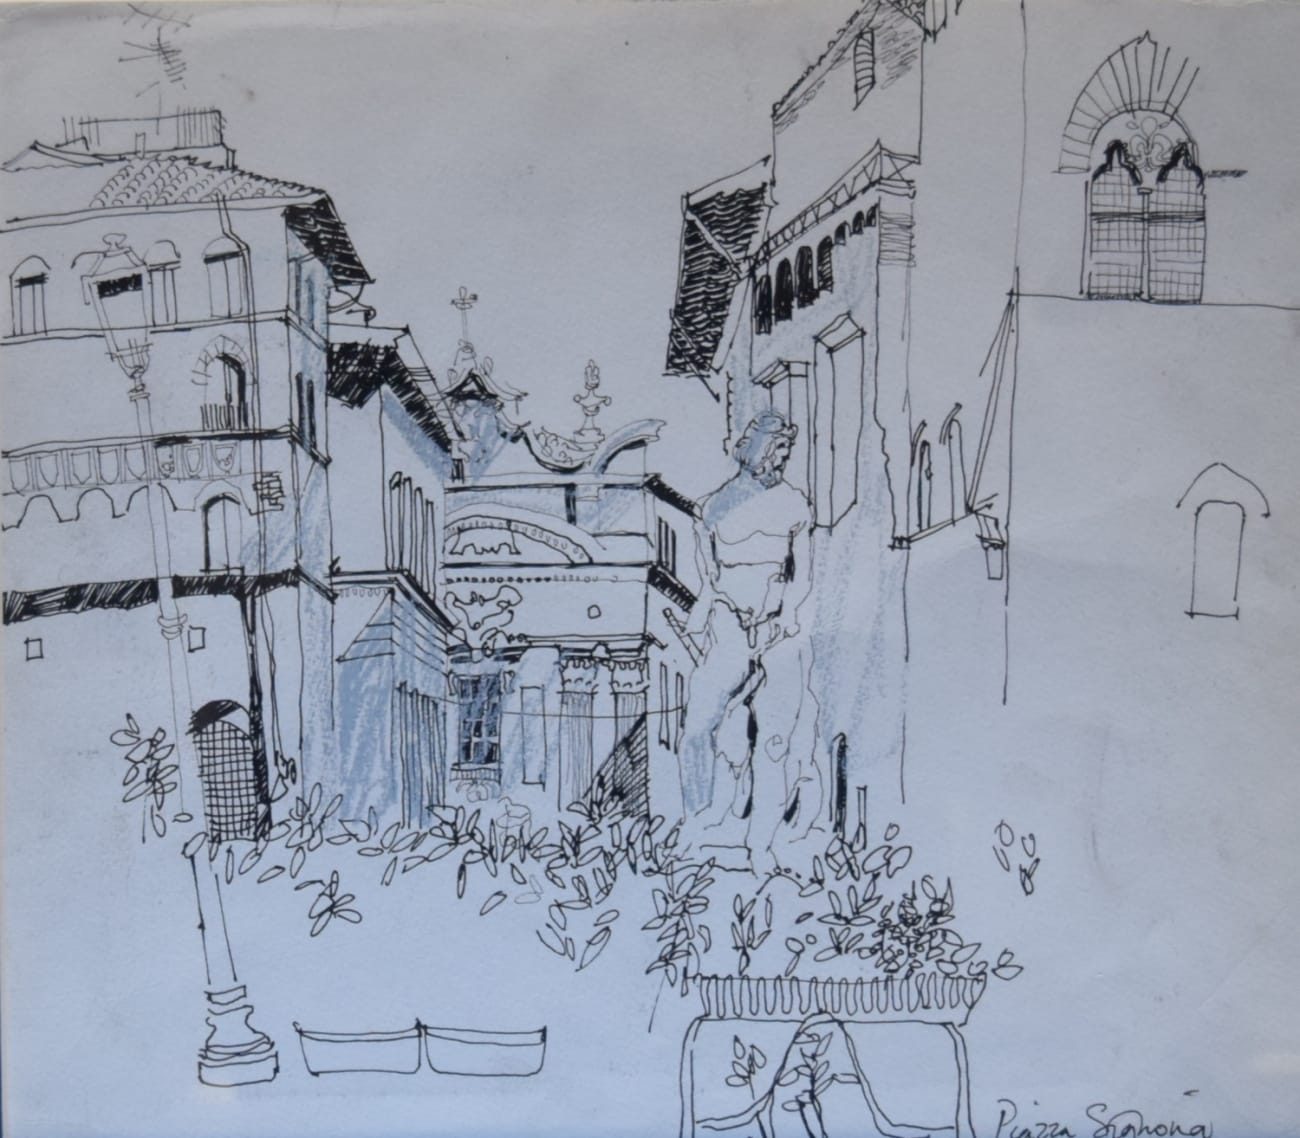 The 'Biancone', drawing in ink. Jane Harman storage and furniture restoration in Florence